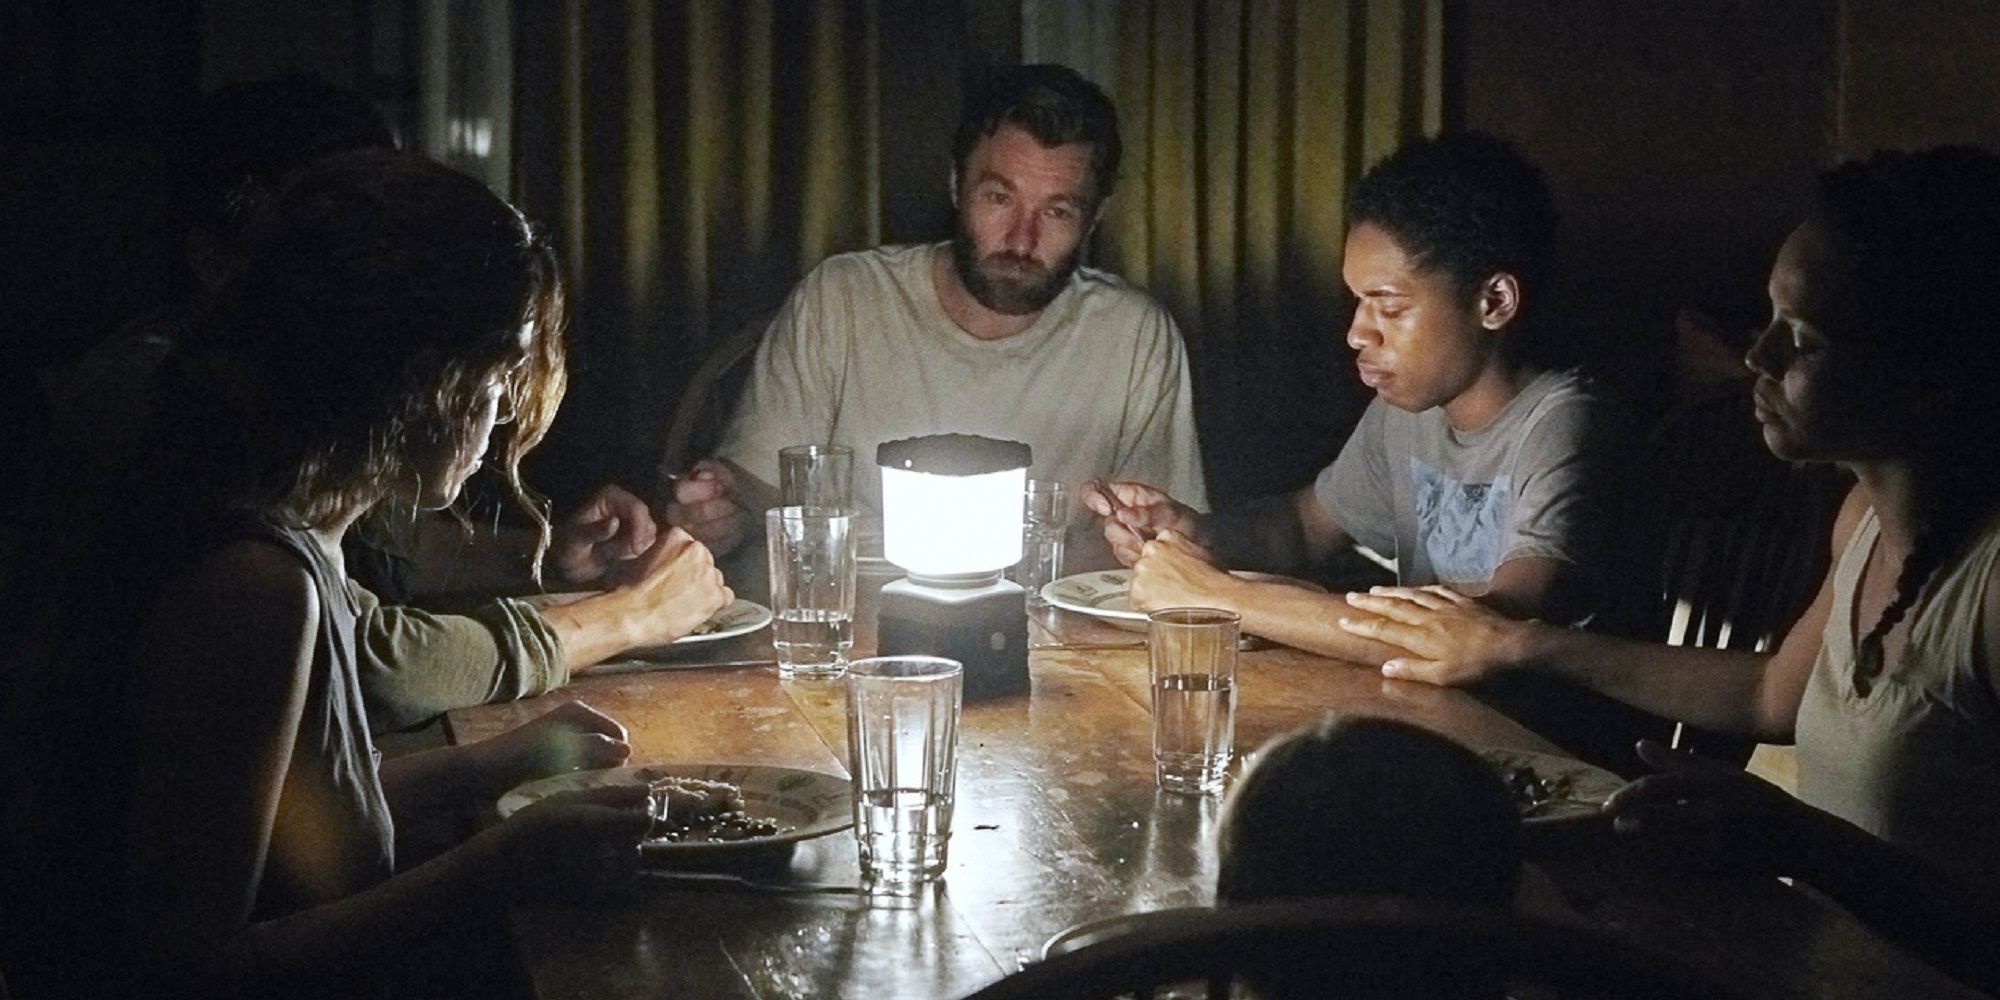 Joel Edgerton, his family, and the strangers at the dinner table in 'It Comes At Night'